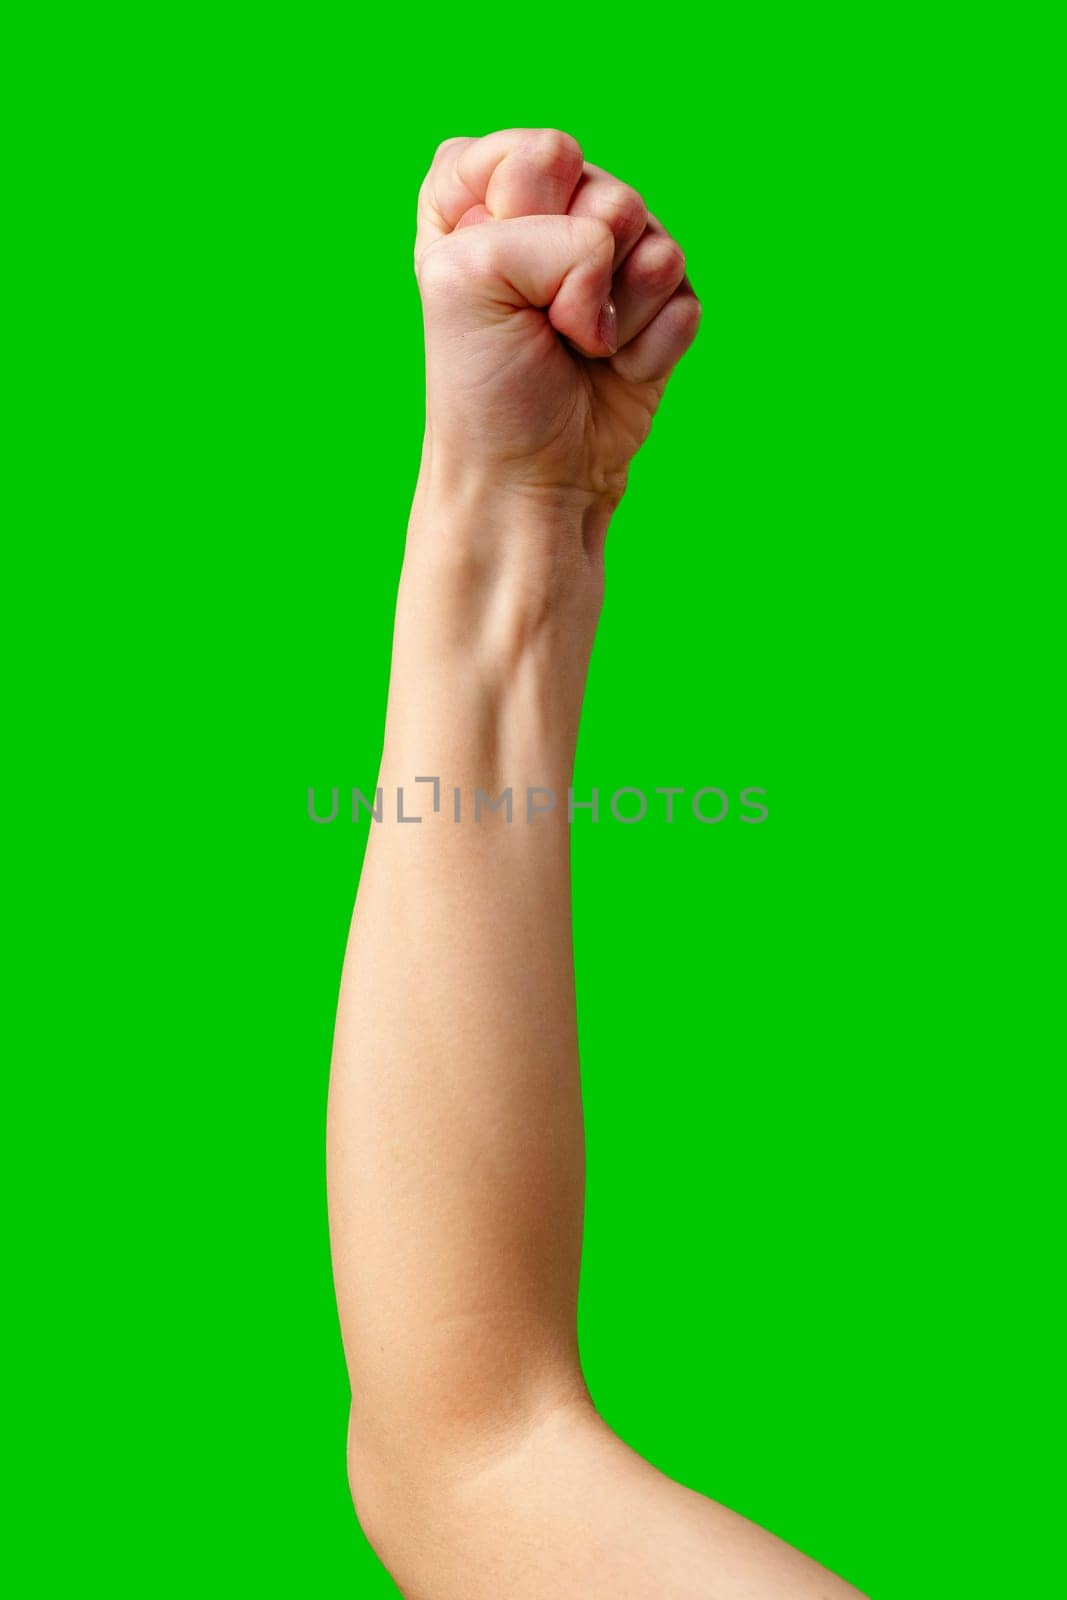 A womans arm is prominently displayed against a vibrant green screen background, providing a versatile canvas for digital editing and graphic design projects. The arm is positioned to showcase flexibility and movement, enhancing the visual appeal of the composition.